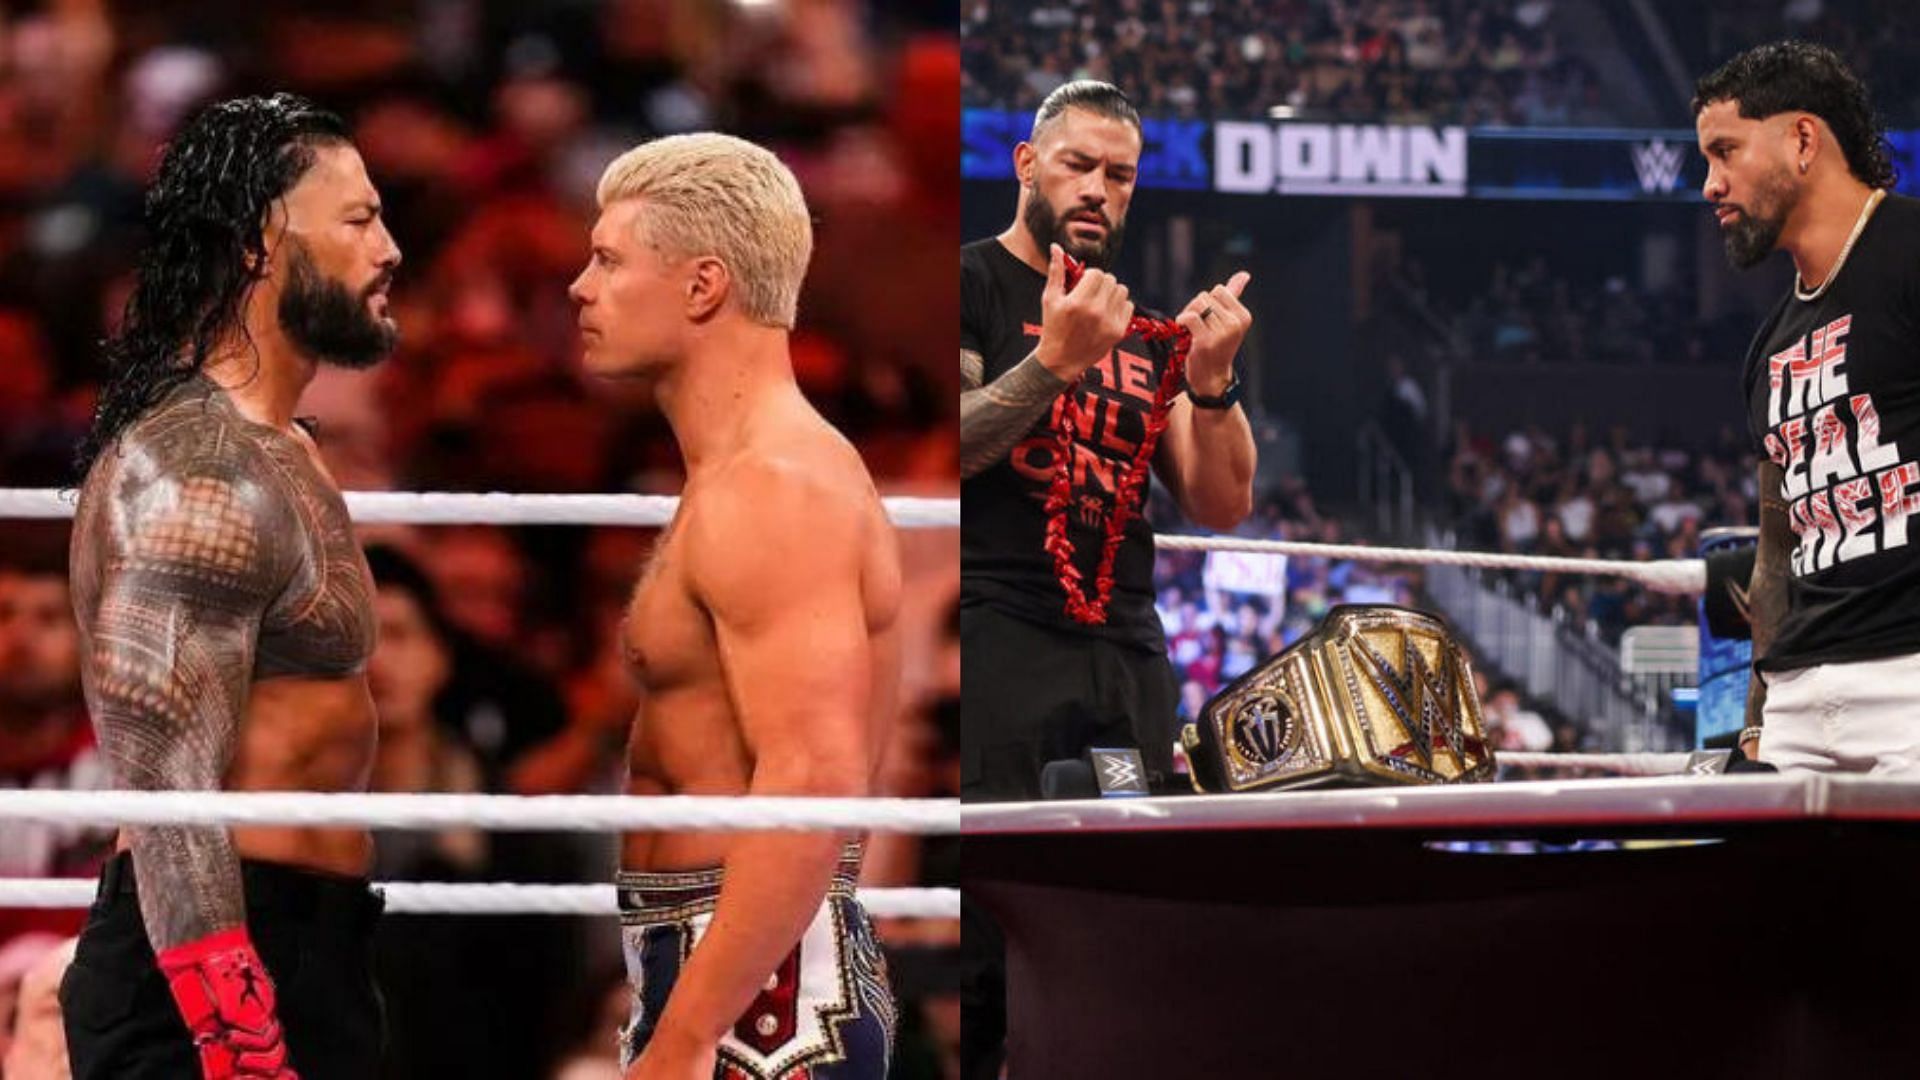 Cody Rhodes was unsuccessful in dethroning Roman Reigns at WrestleMania 39